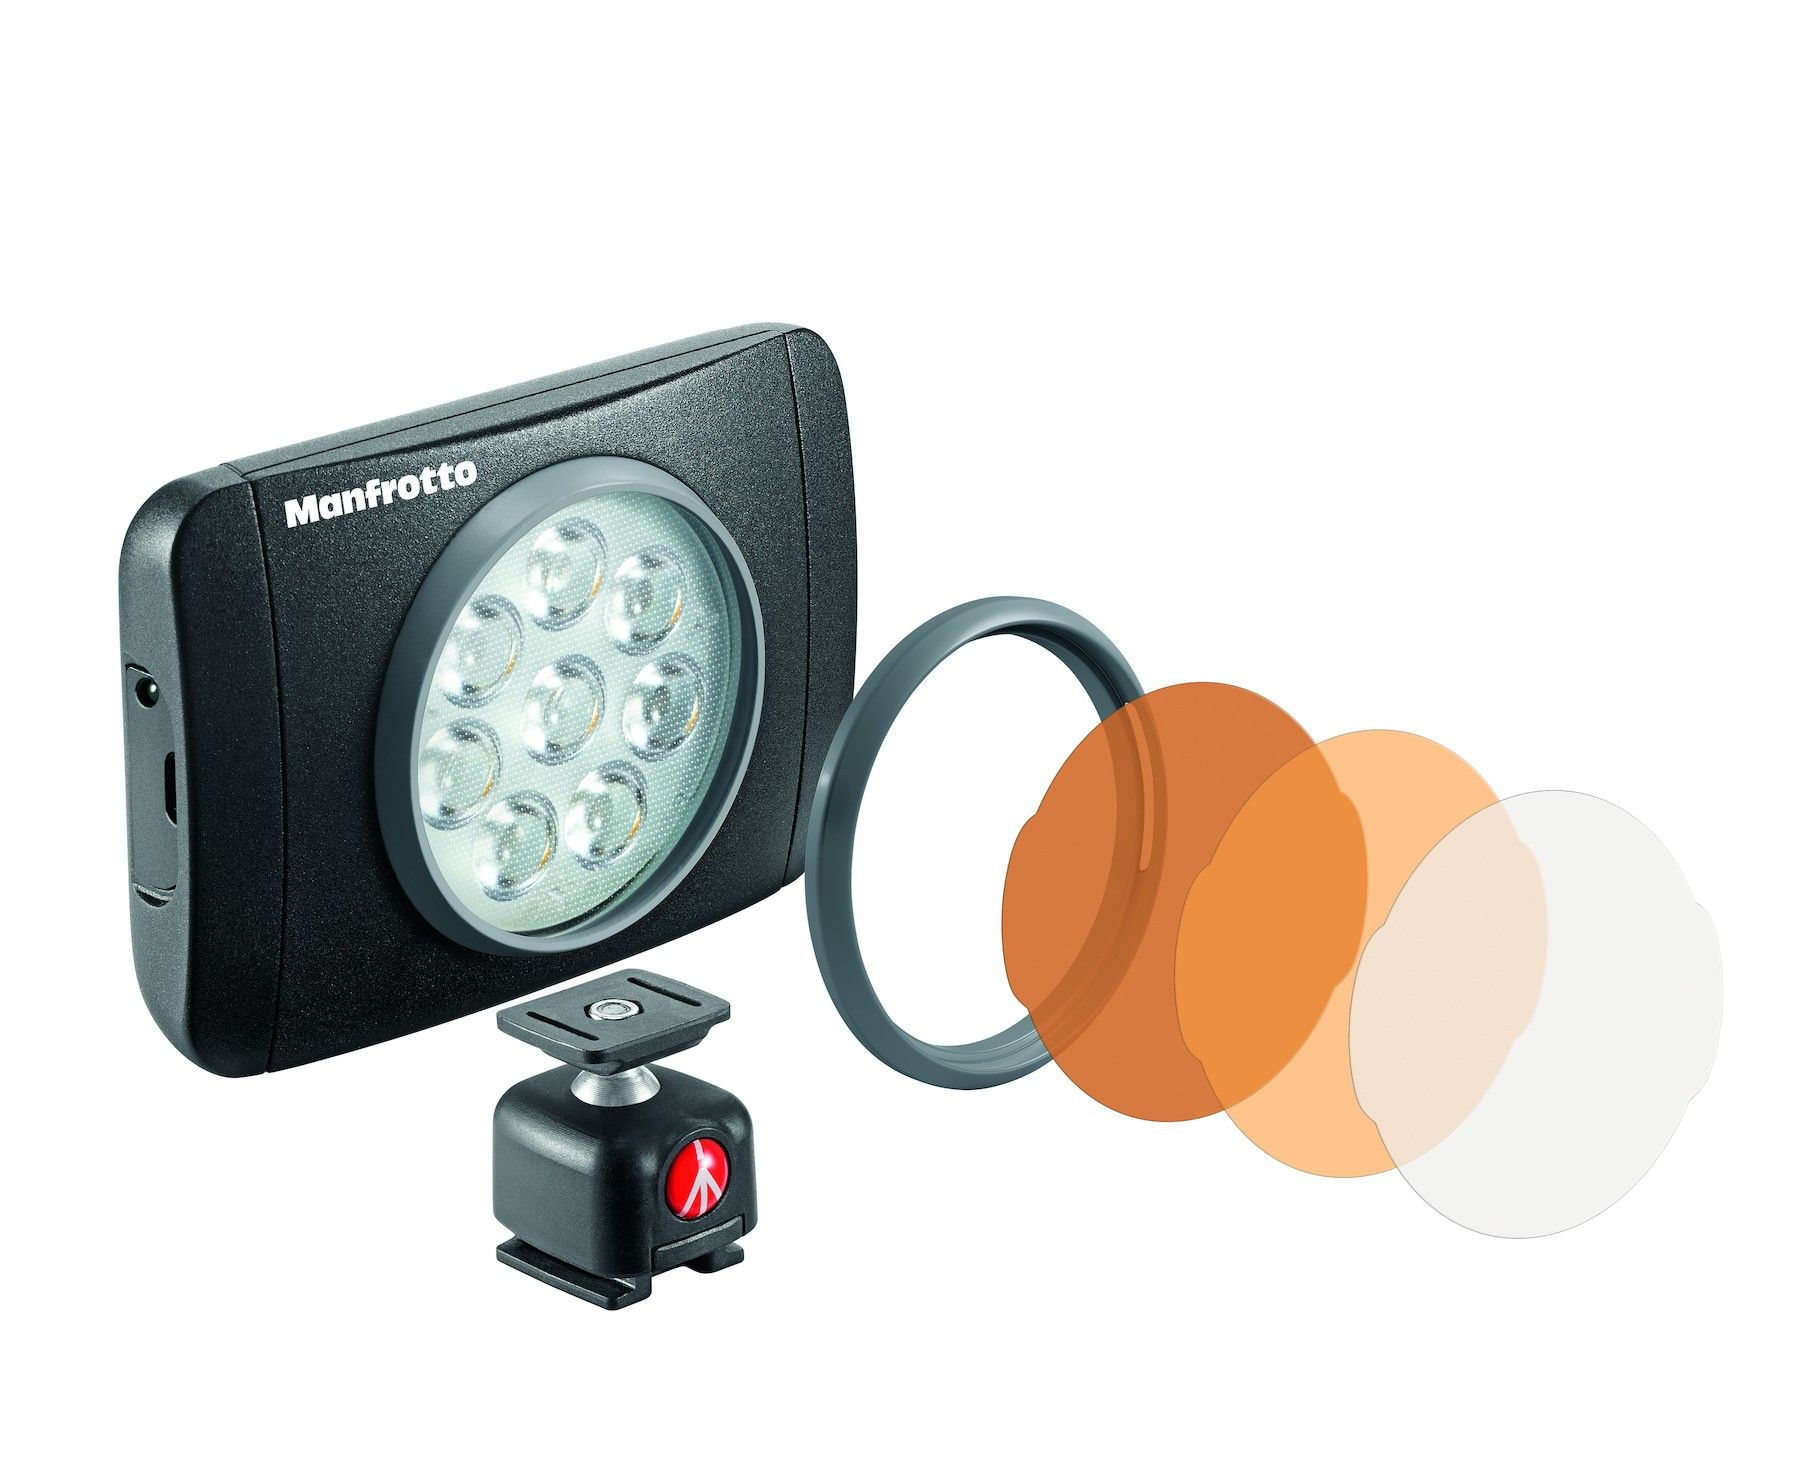 Manfrotto Lumimuse LED Light